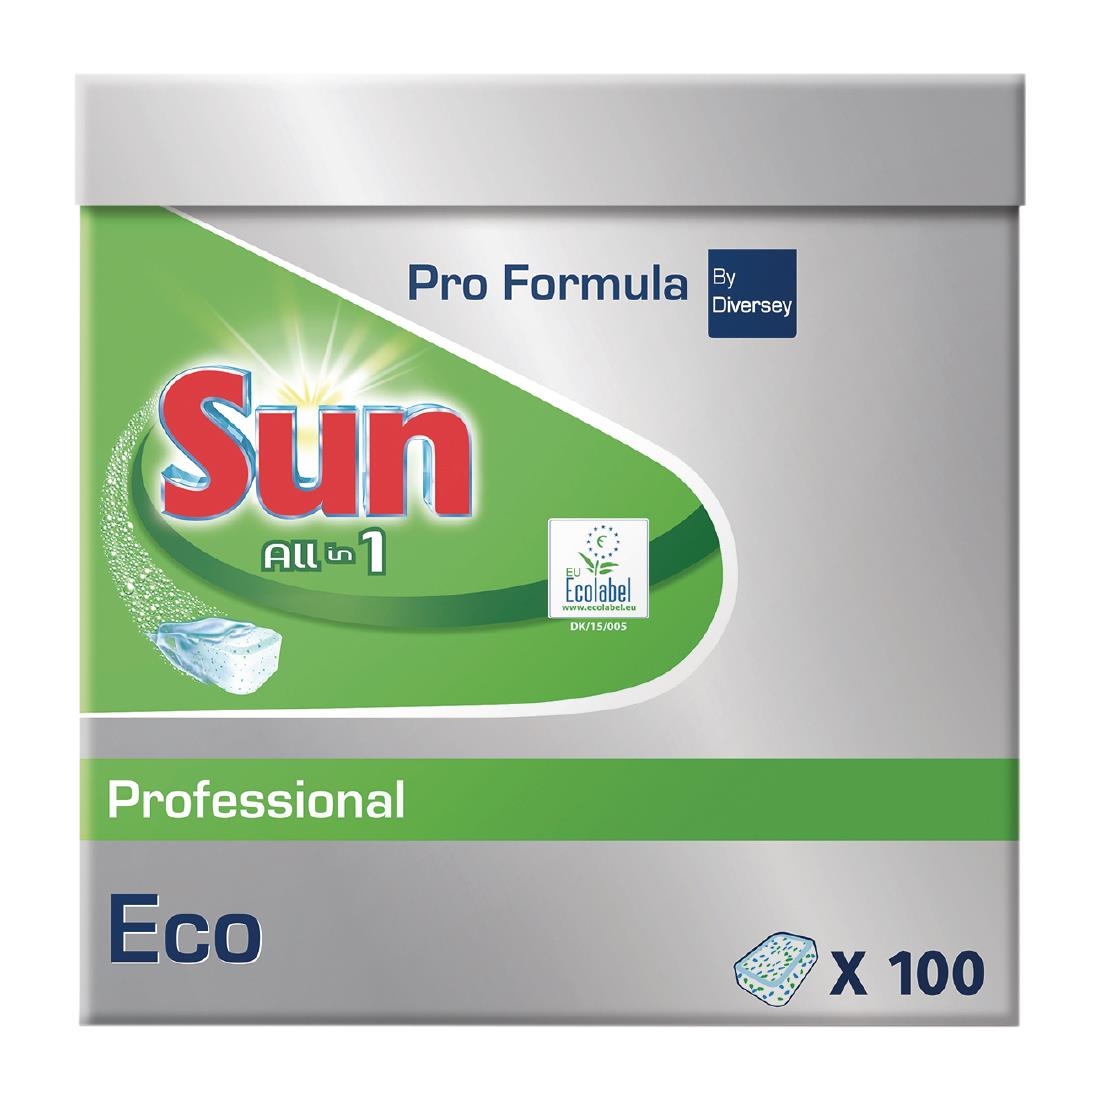 Sun Pro Formula All-in-One Eco Dishwasher Tablets (5 x 100 Pack)